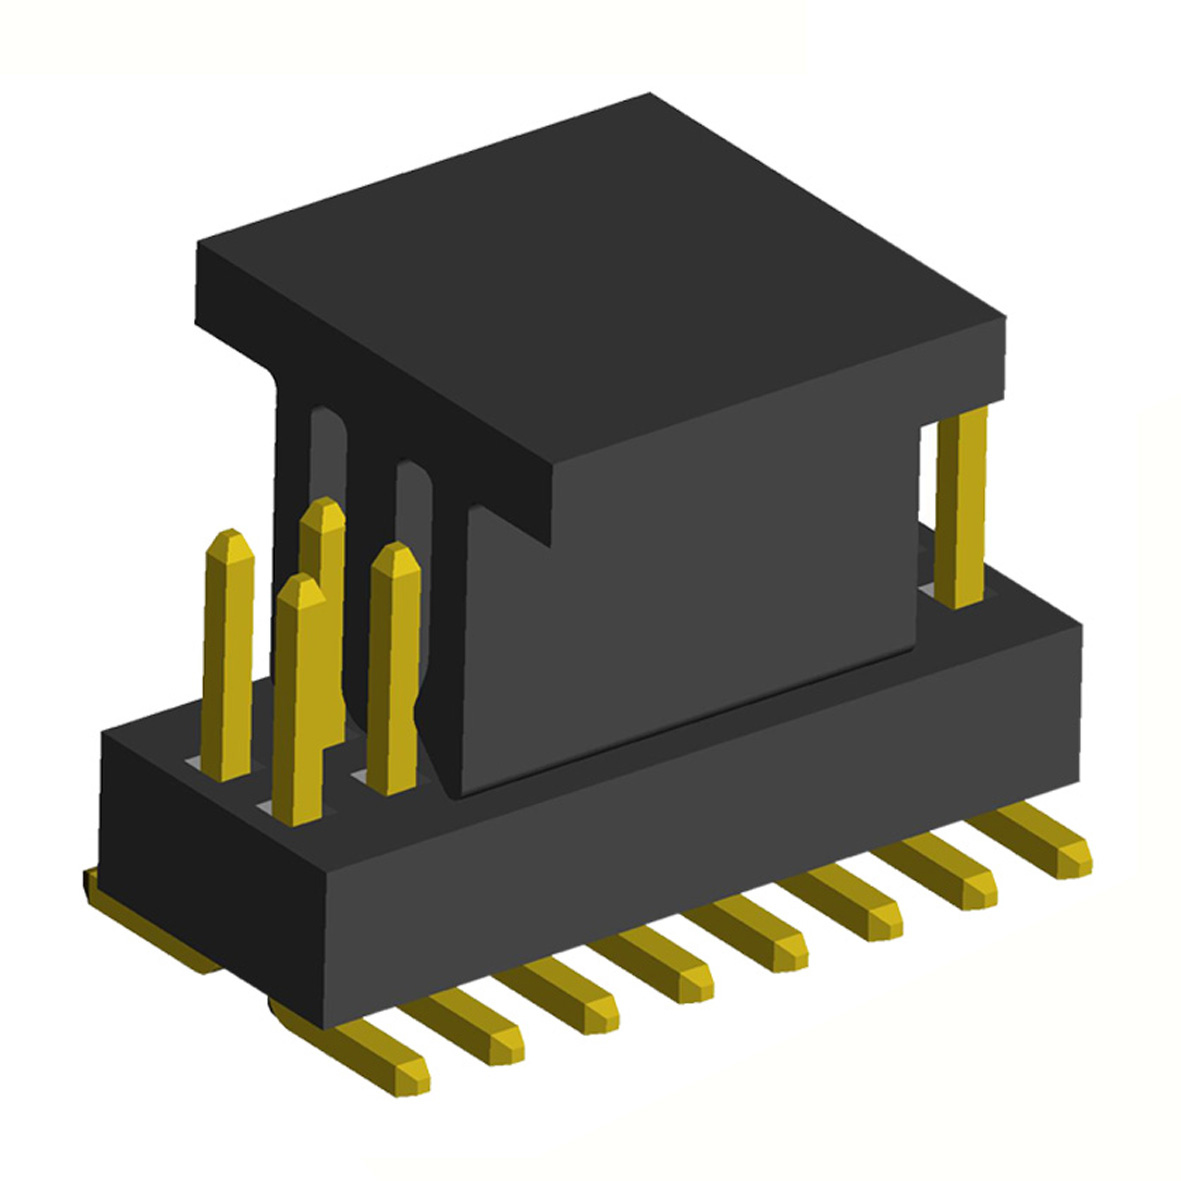 2191SM-XXXG-CP series, open double row straight pin headers with guides on PCB for surface mounting (SMD), pitch 1.00 mm, Board-to-Board connectors, pin headers and sockets for them > pitch 1.00 mm